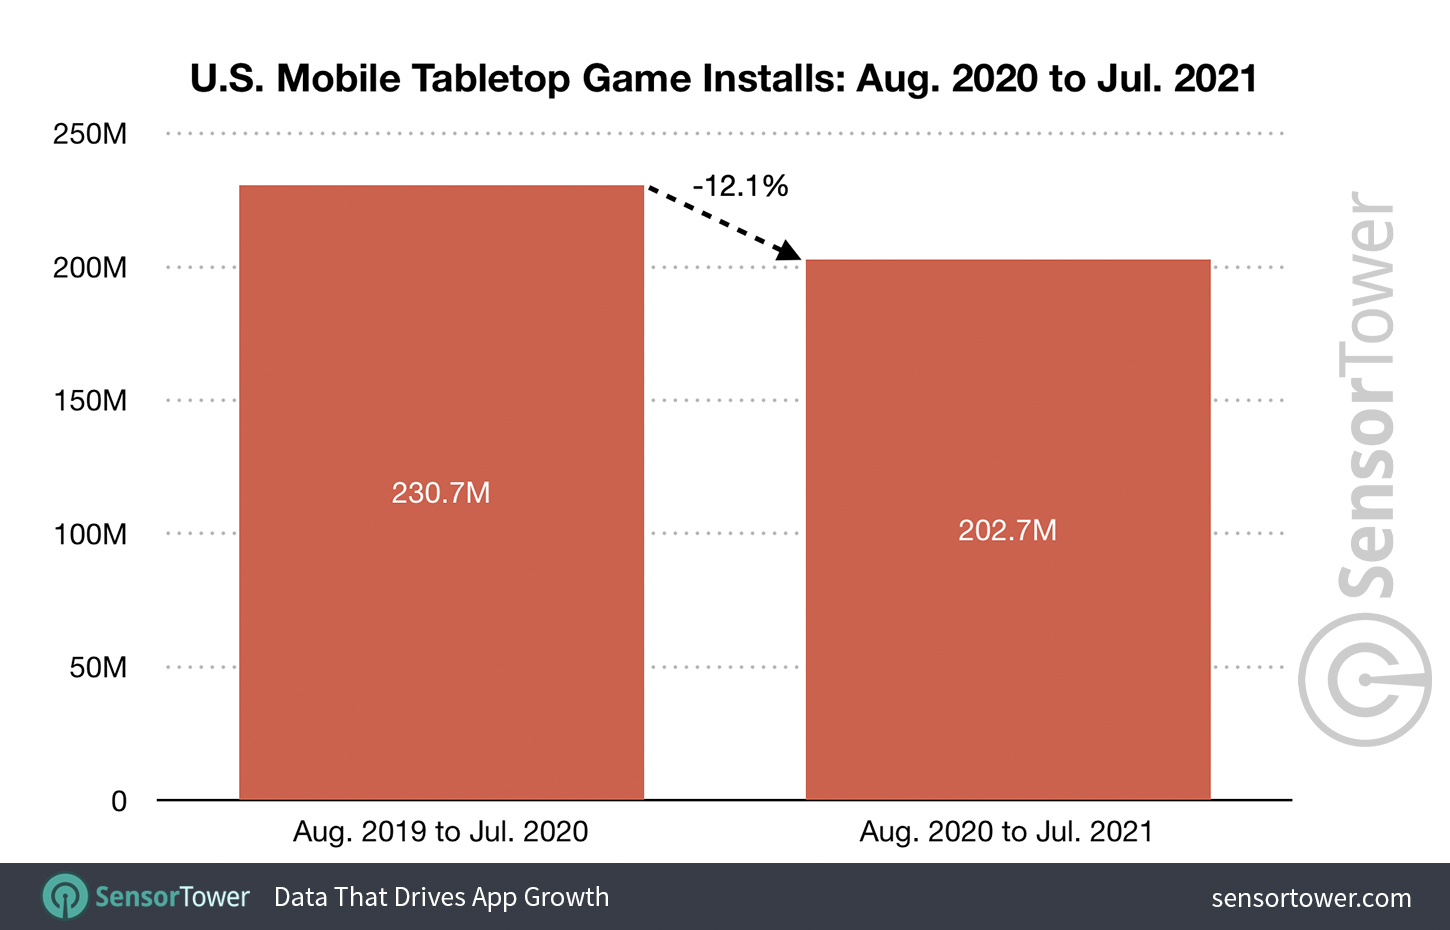 U.S. Mobile Tabletop Game Installs: August 2020 to July 2021